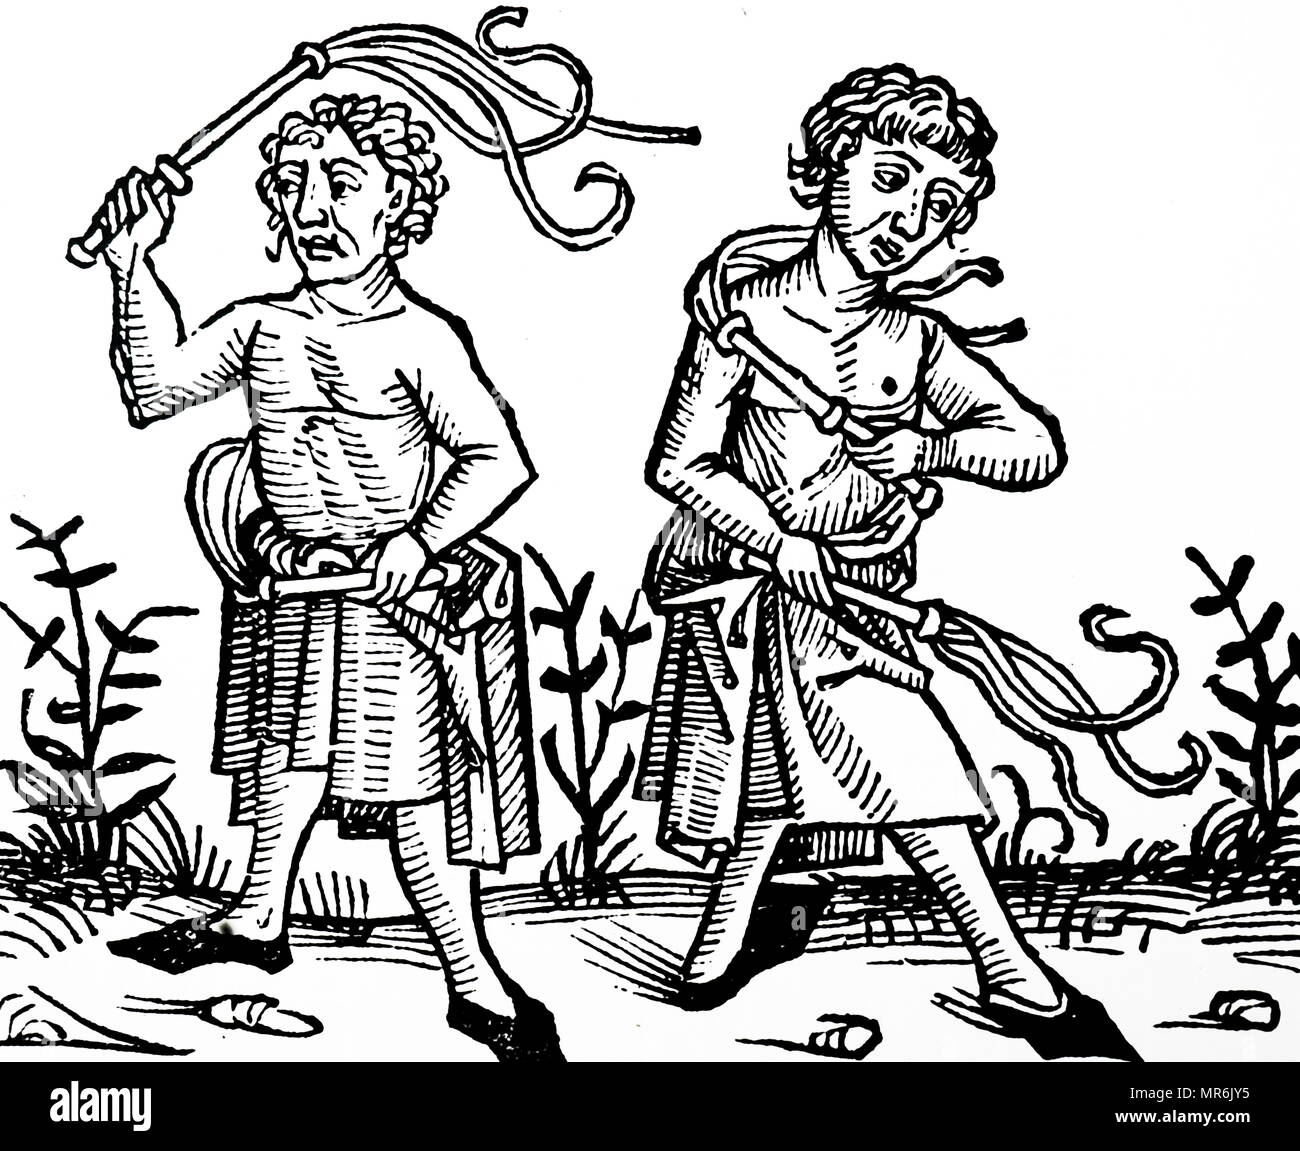 Woodblock engraving depicting members of the sect of Flagellants scourging themselves. At the time of the Black Death in Europe, members of the sect went through the streets whipping themselves in an attempt to make retribution to God for their sins of the people and so save the population from God's anger manifested in the form of plague. Dated 15th century Stock Photo